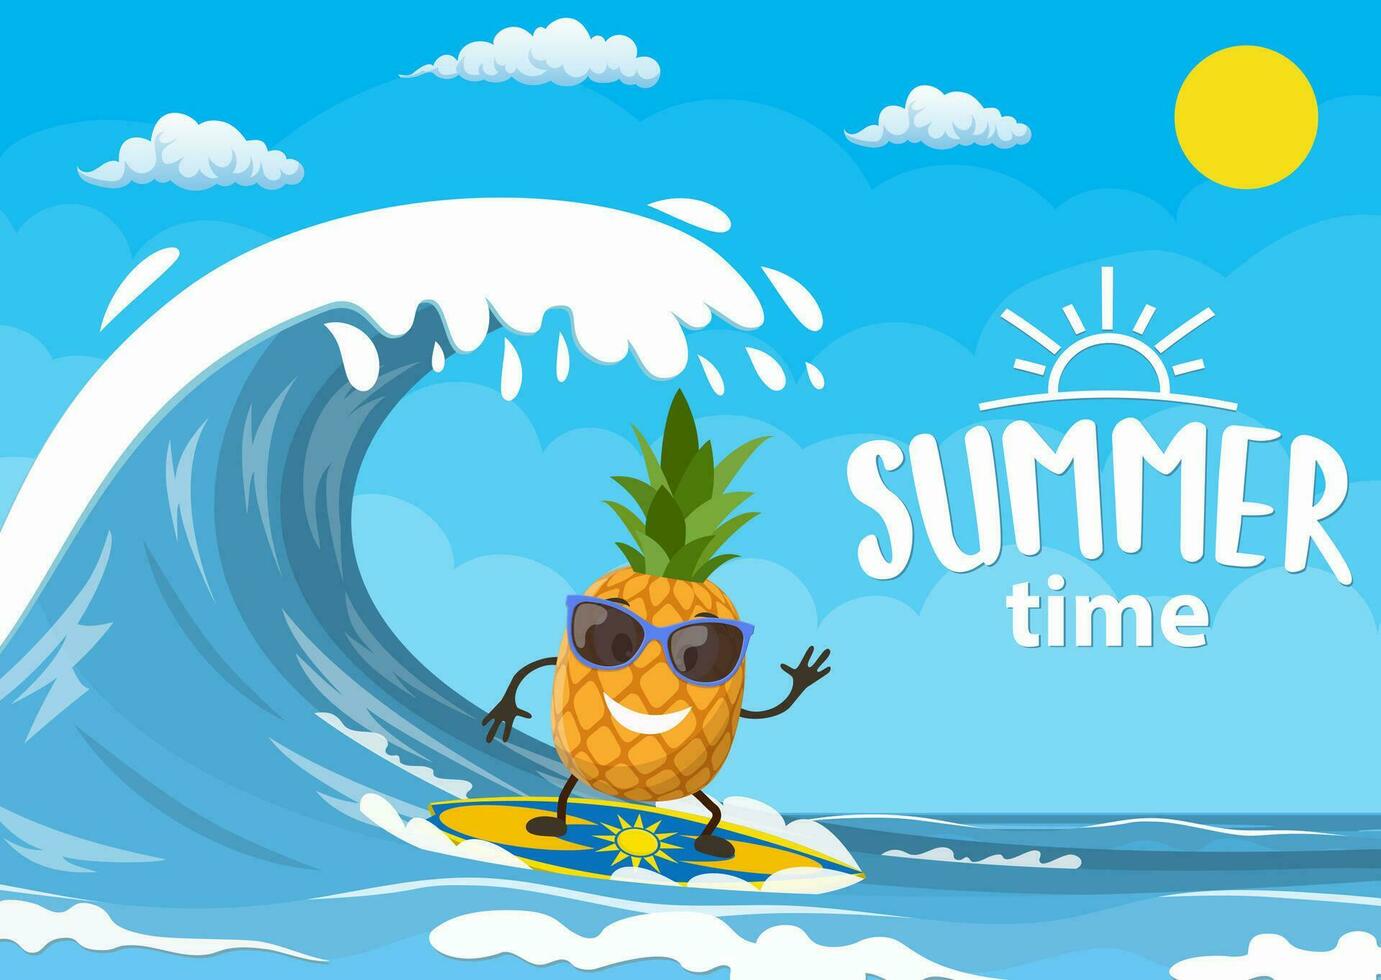 pineapple characters surfing on wave. Holidays on the sea. Beach activities. Summer time. Vector illustration in flat style